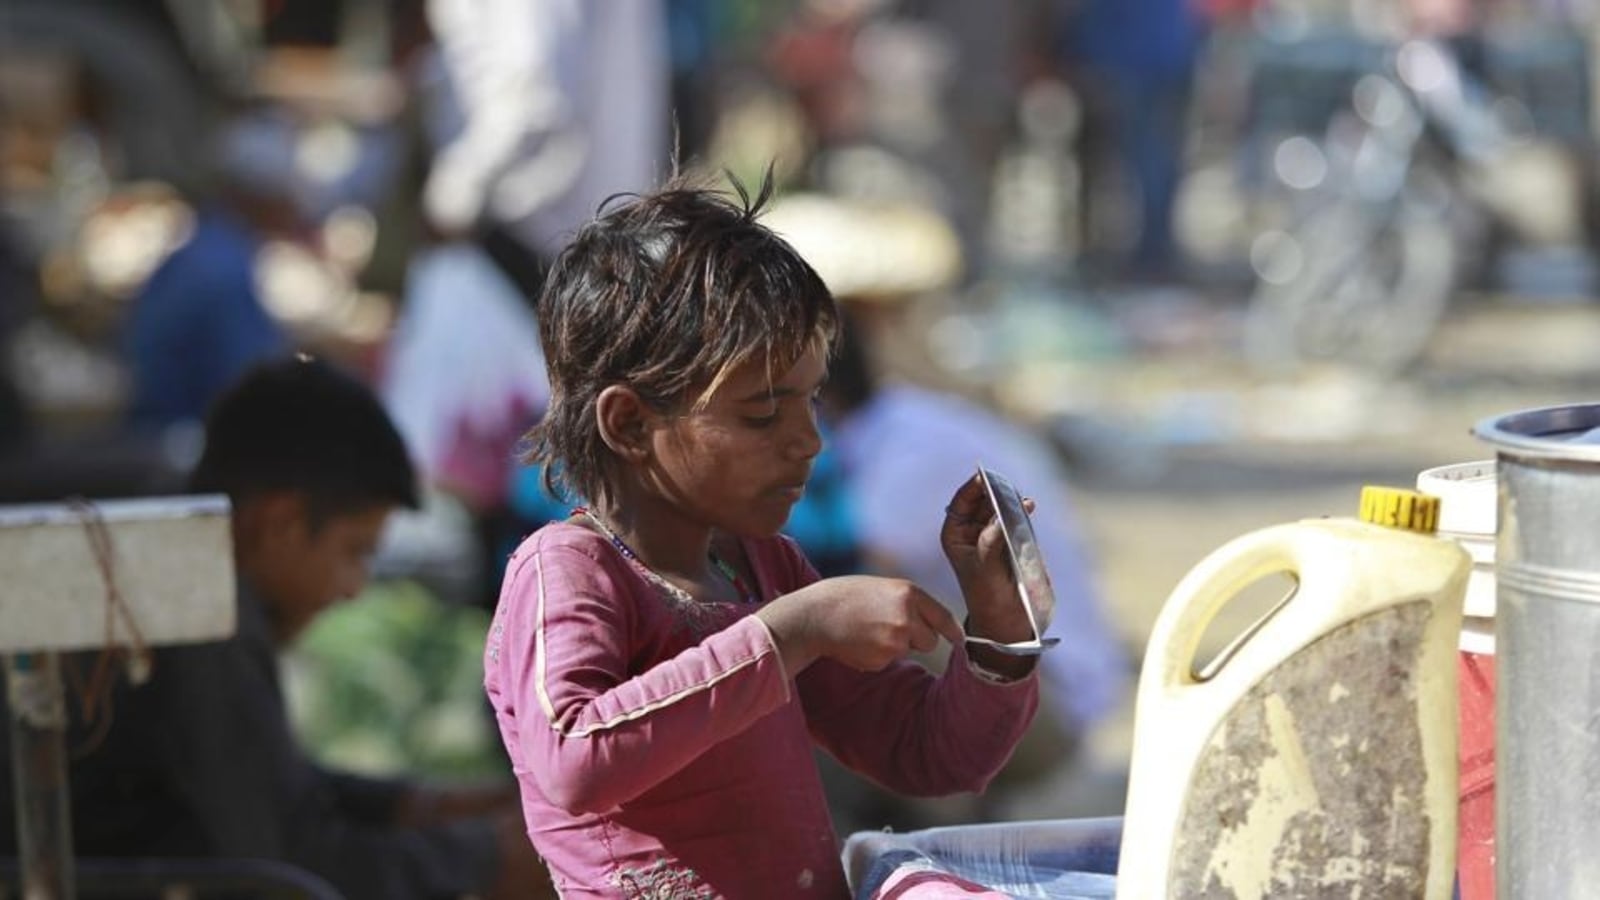 Global Hunger Index 2022: India slips six places, ranked 107 of 121 countries | Latest News India - Hindustan Times